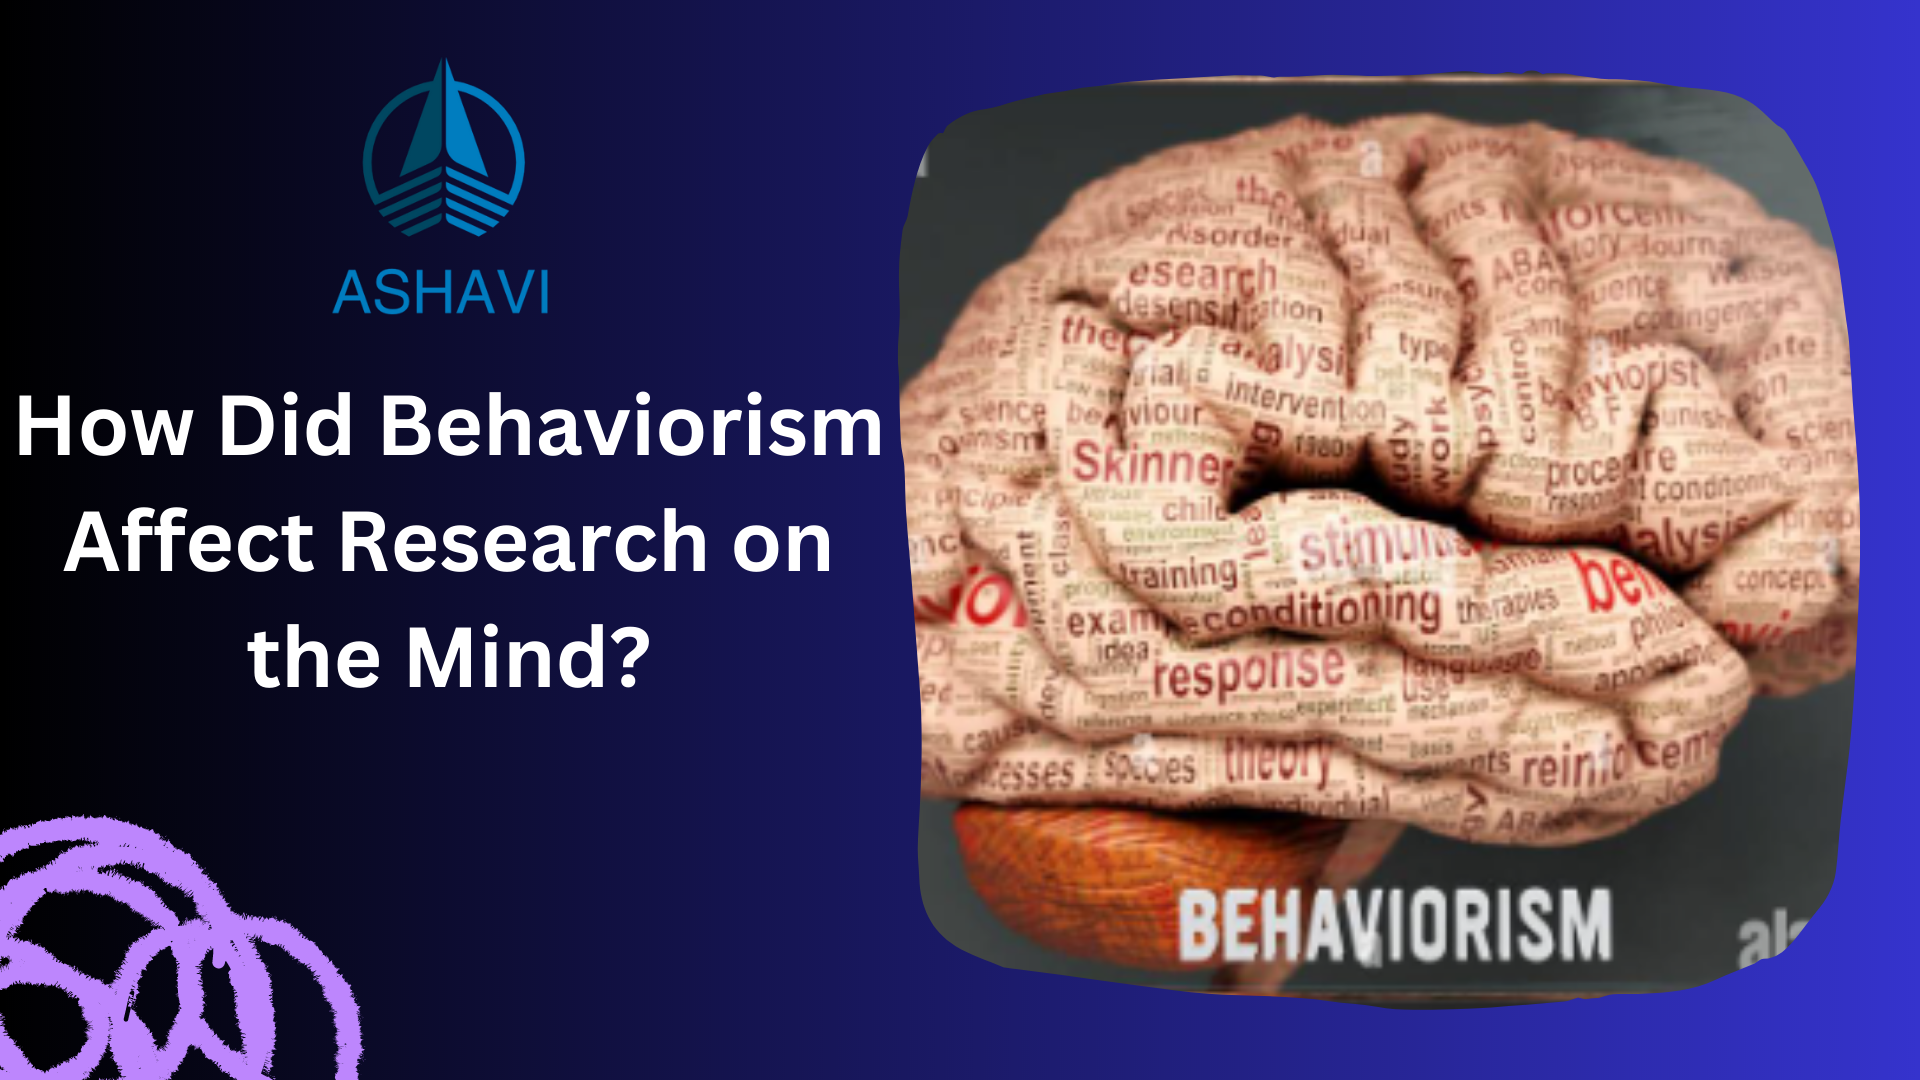 How Did Behaviorism Affect Research on the Mind?